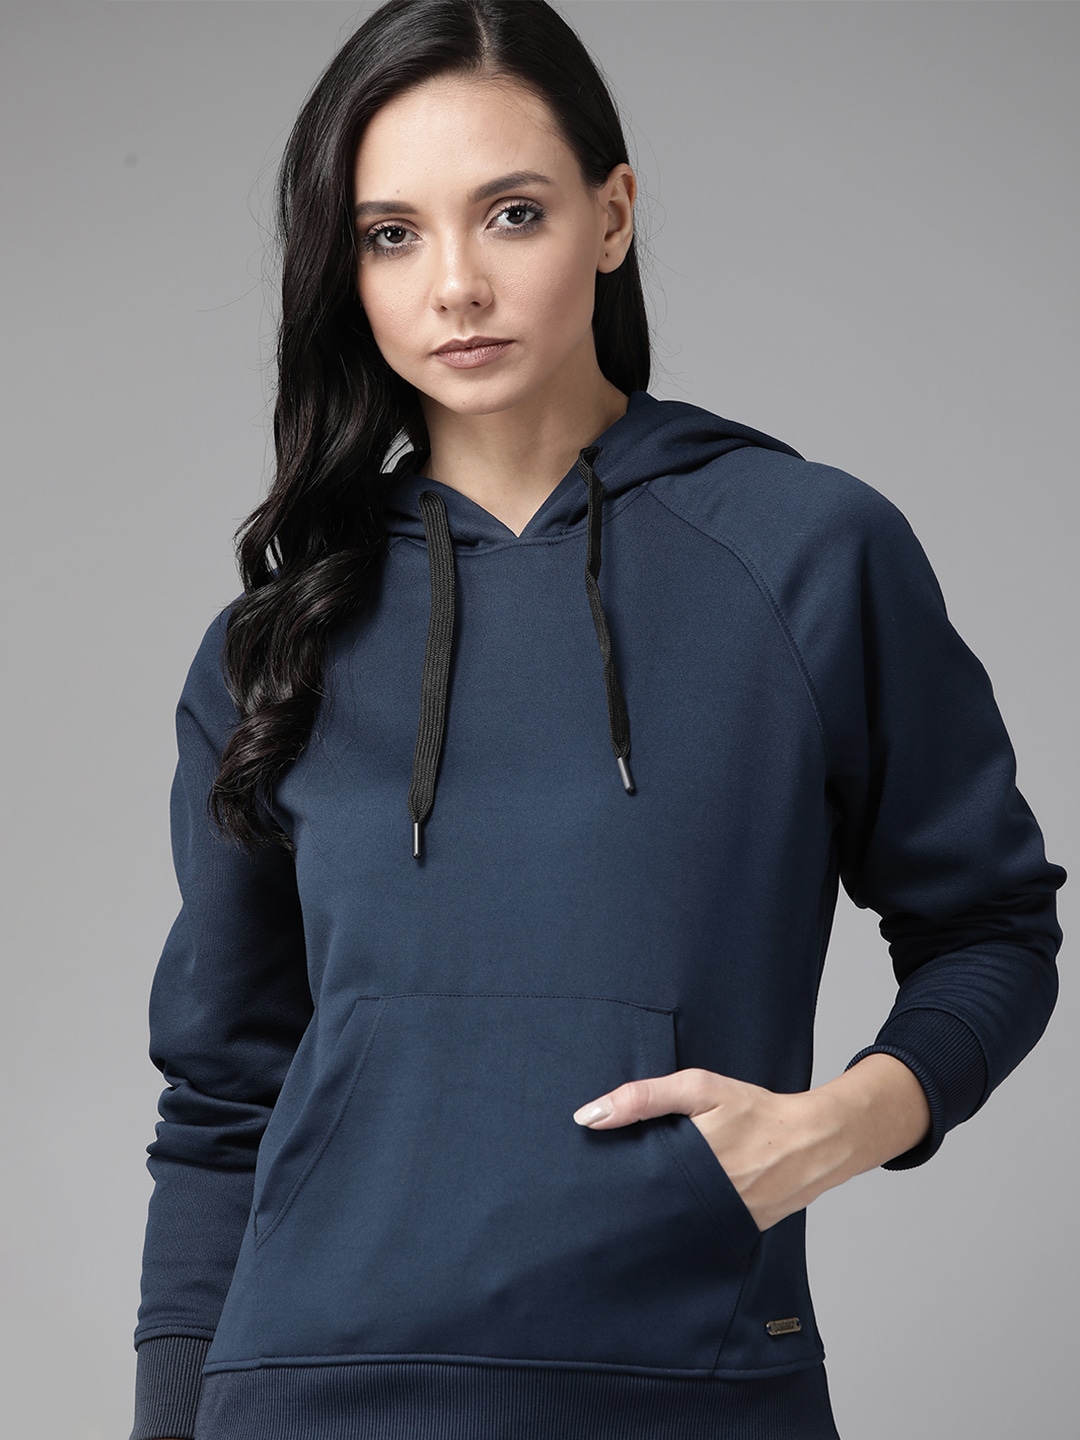 Roadster Women Navy Blue Solid Hooded Sweatshirt Convertible Into a Bag Price in India